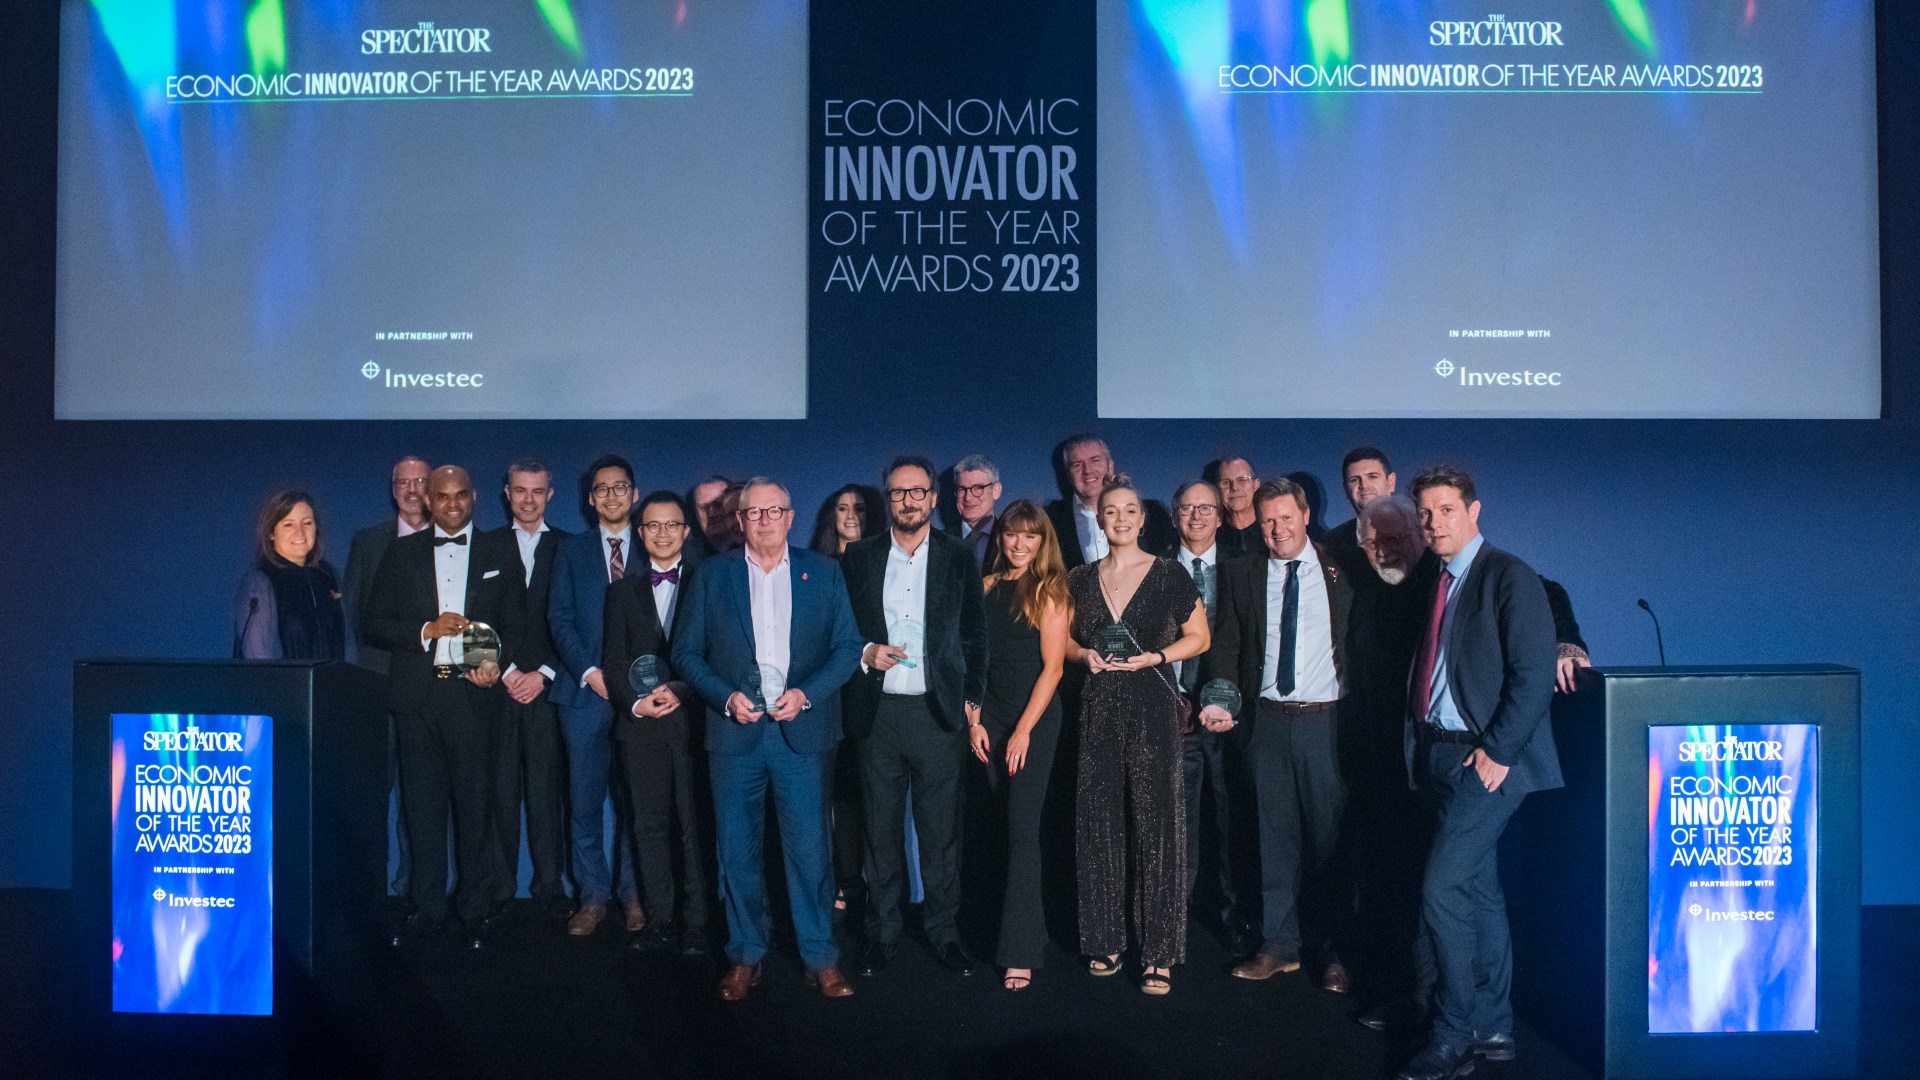 Winners of the 2023 Economic Innovator of the Year awards